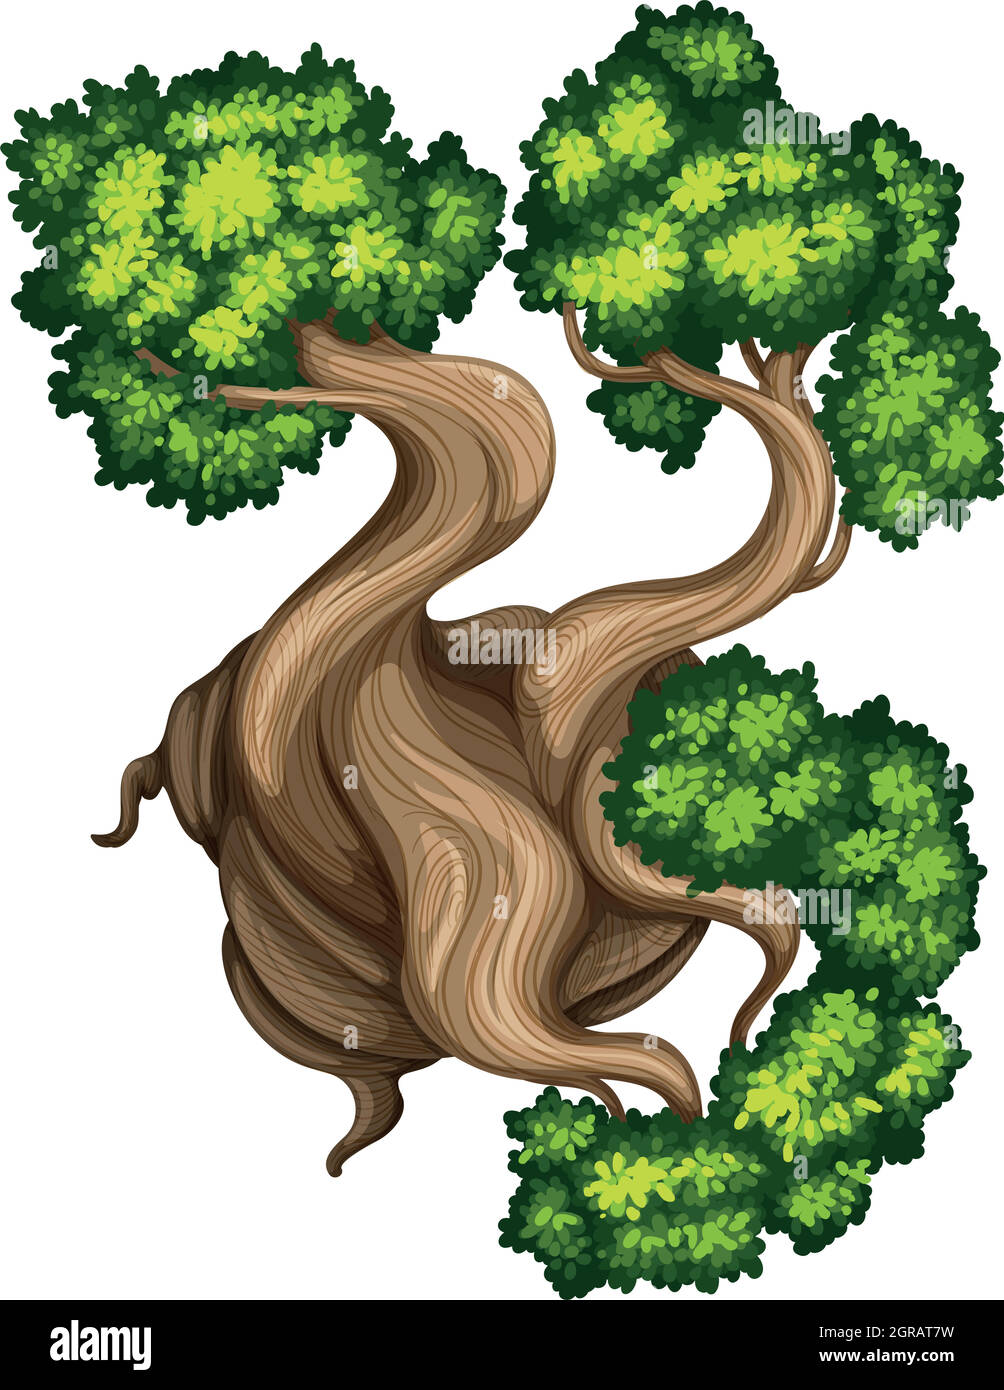 A topview of a bristlecone pine tree Stock Vector